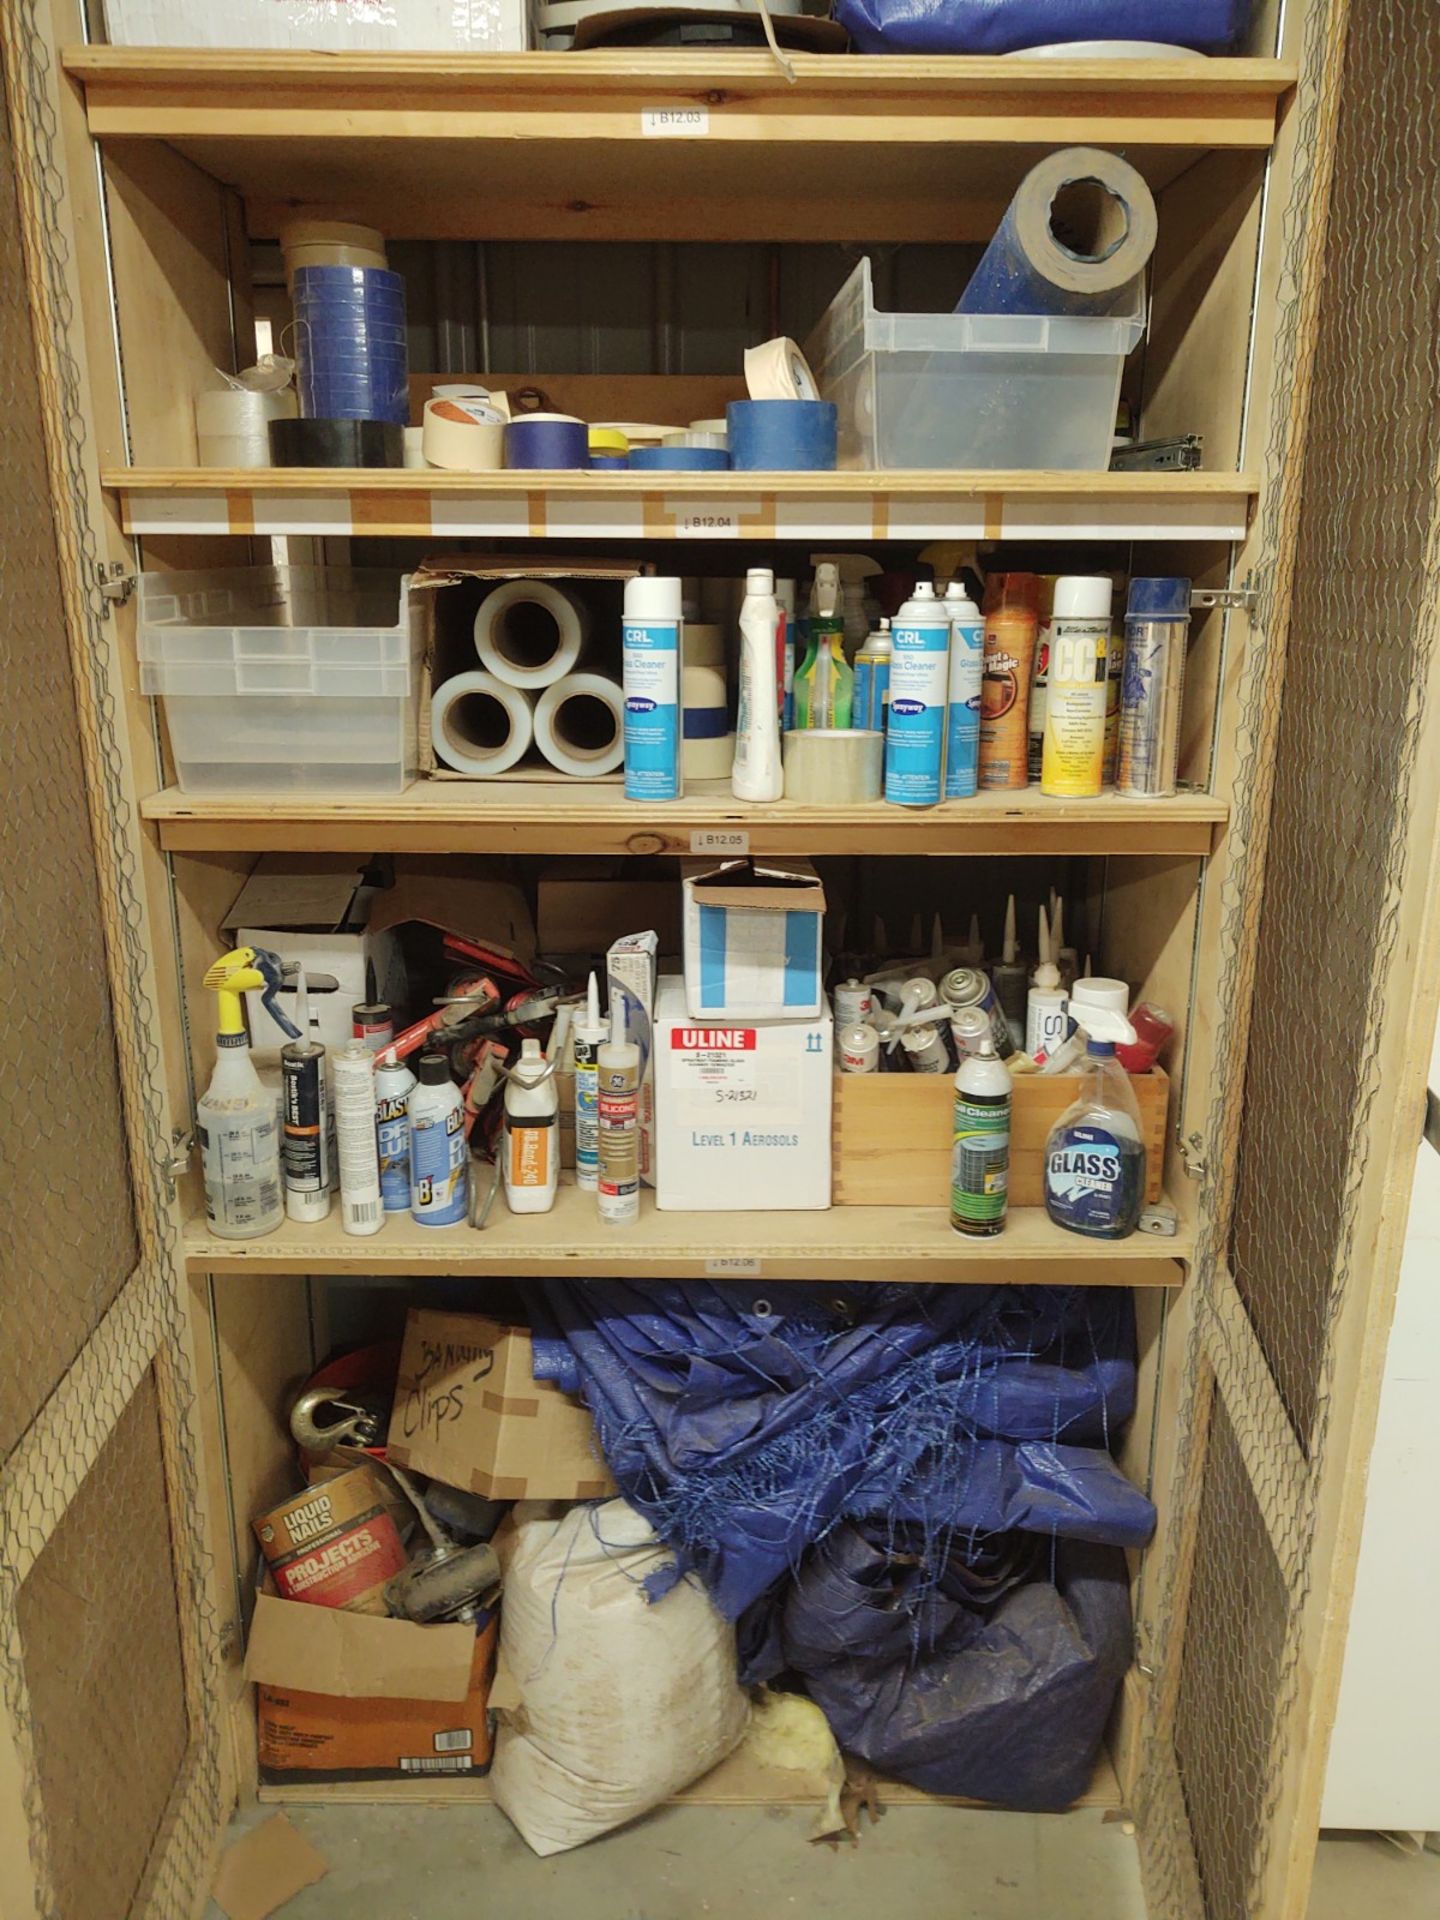 (Lot) In and On 4 Cabinets C/o Asst. Supplies (Inspection Urged) - Image 4 of 7